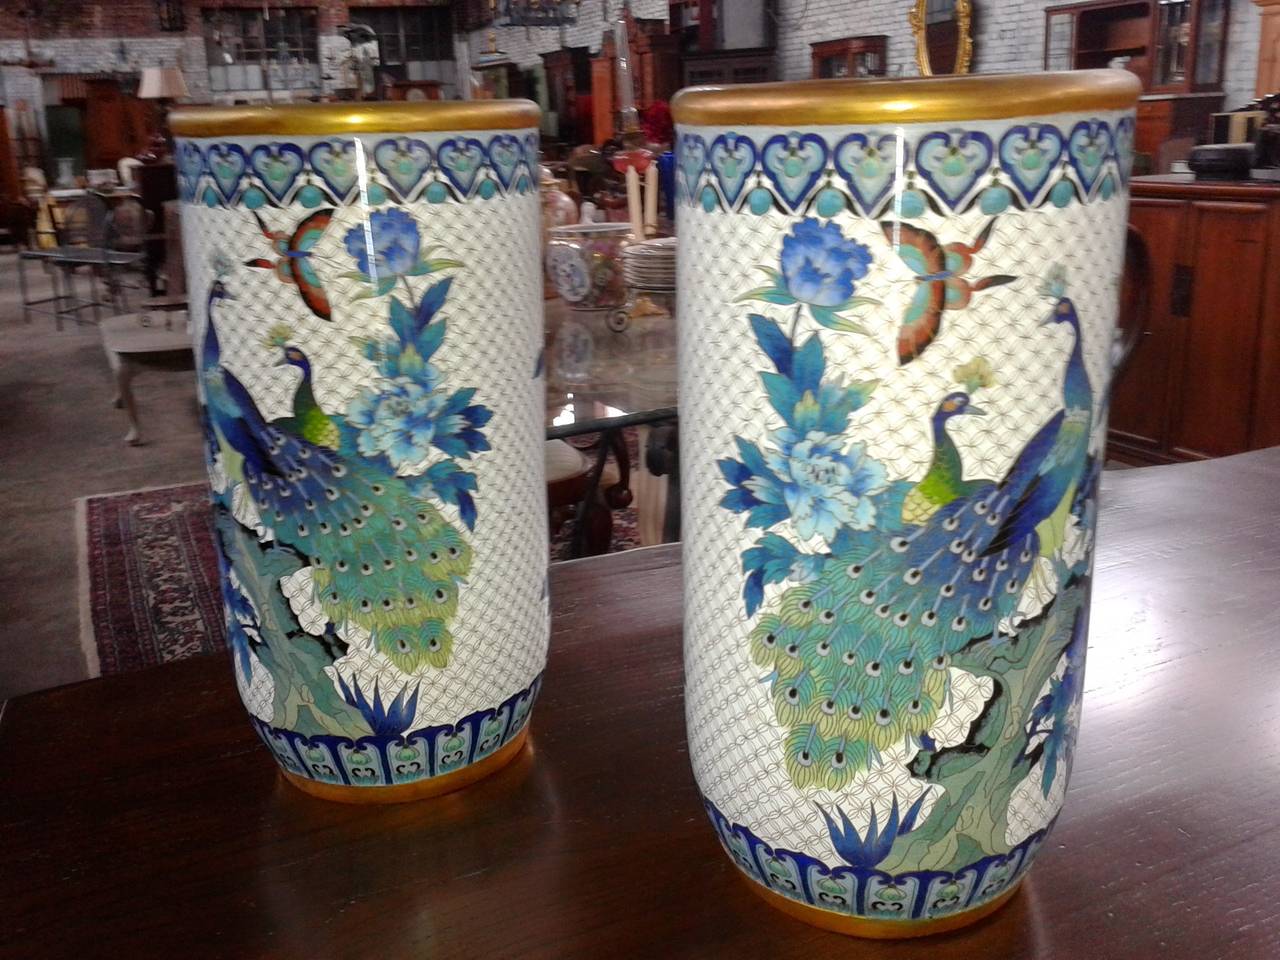 This circa 1880s cloisonné peacock floral vase or umbrella stand in enamel and brass are very beautiful. Striking with the butterflies, peacock and floral scene accented by the turquoise inside and a gold rim.